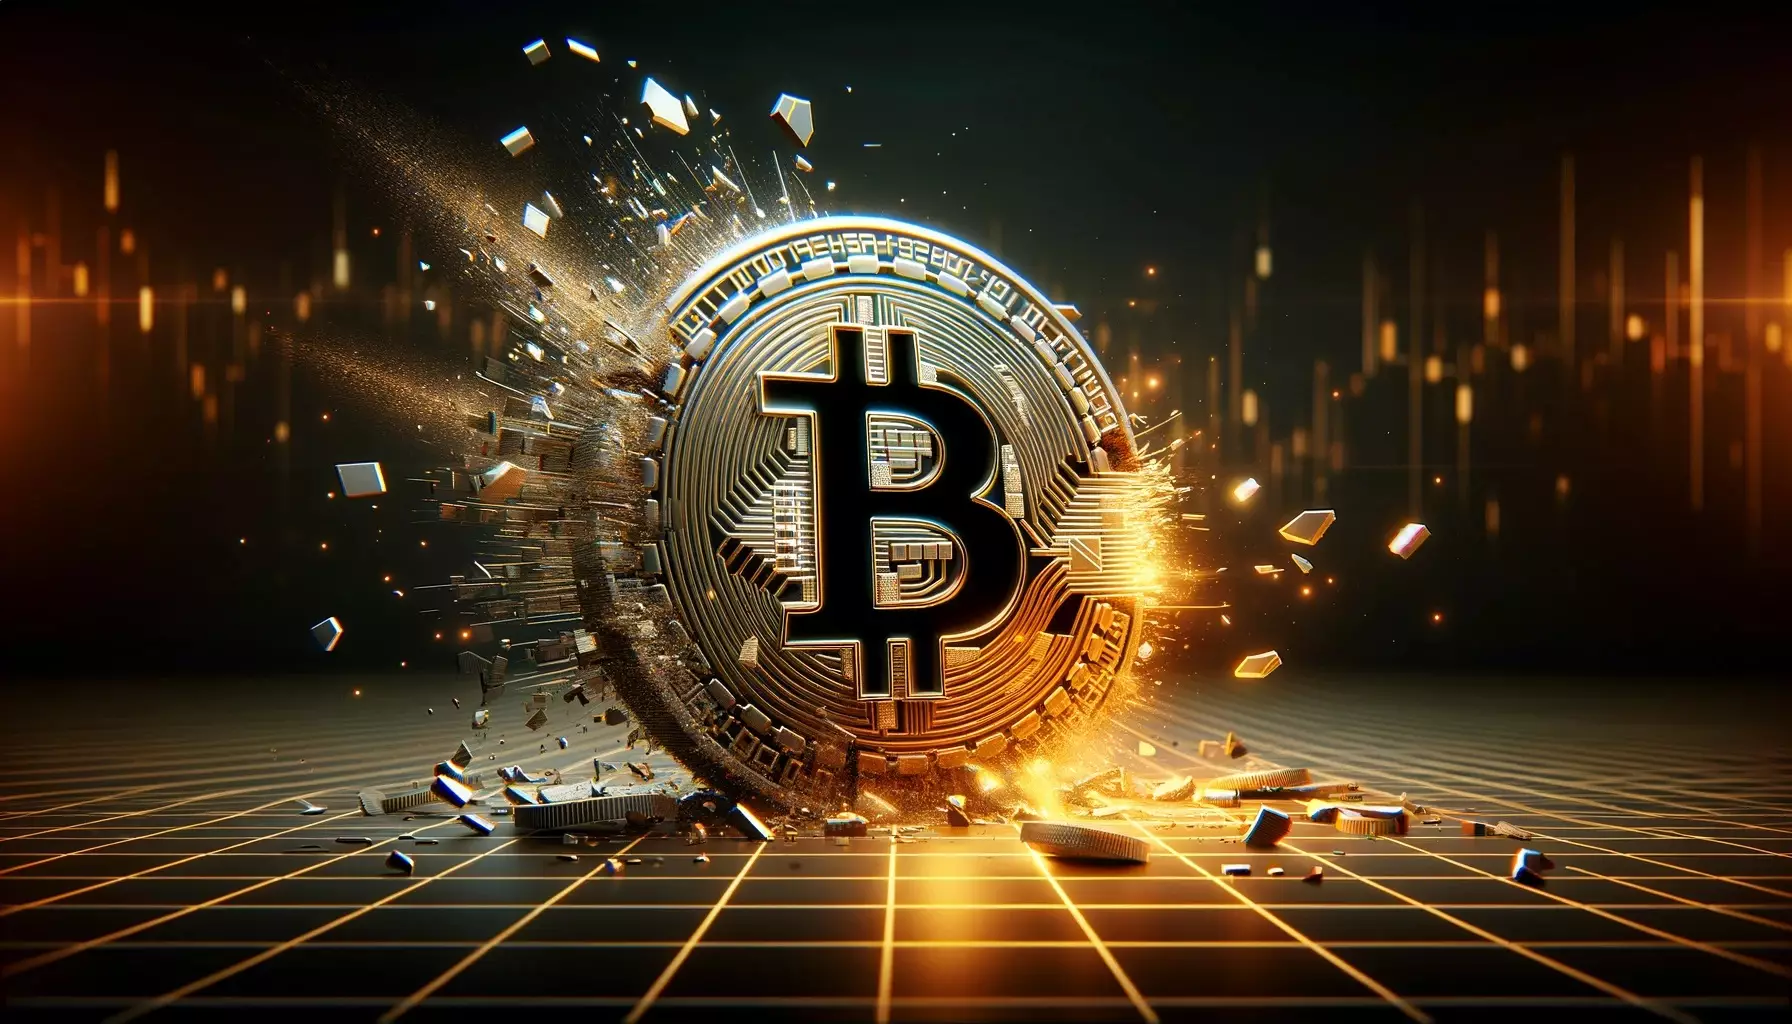 The Bitcoin Price Crash: Analyzing the Factors Behind the Recent Plunge